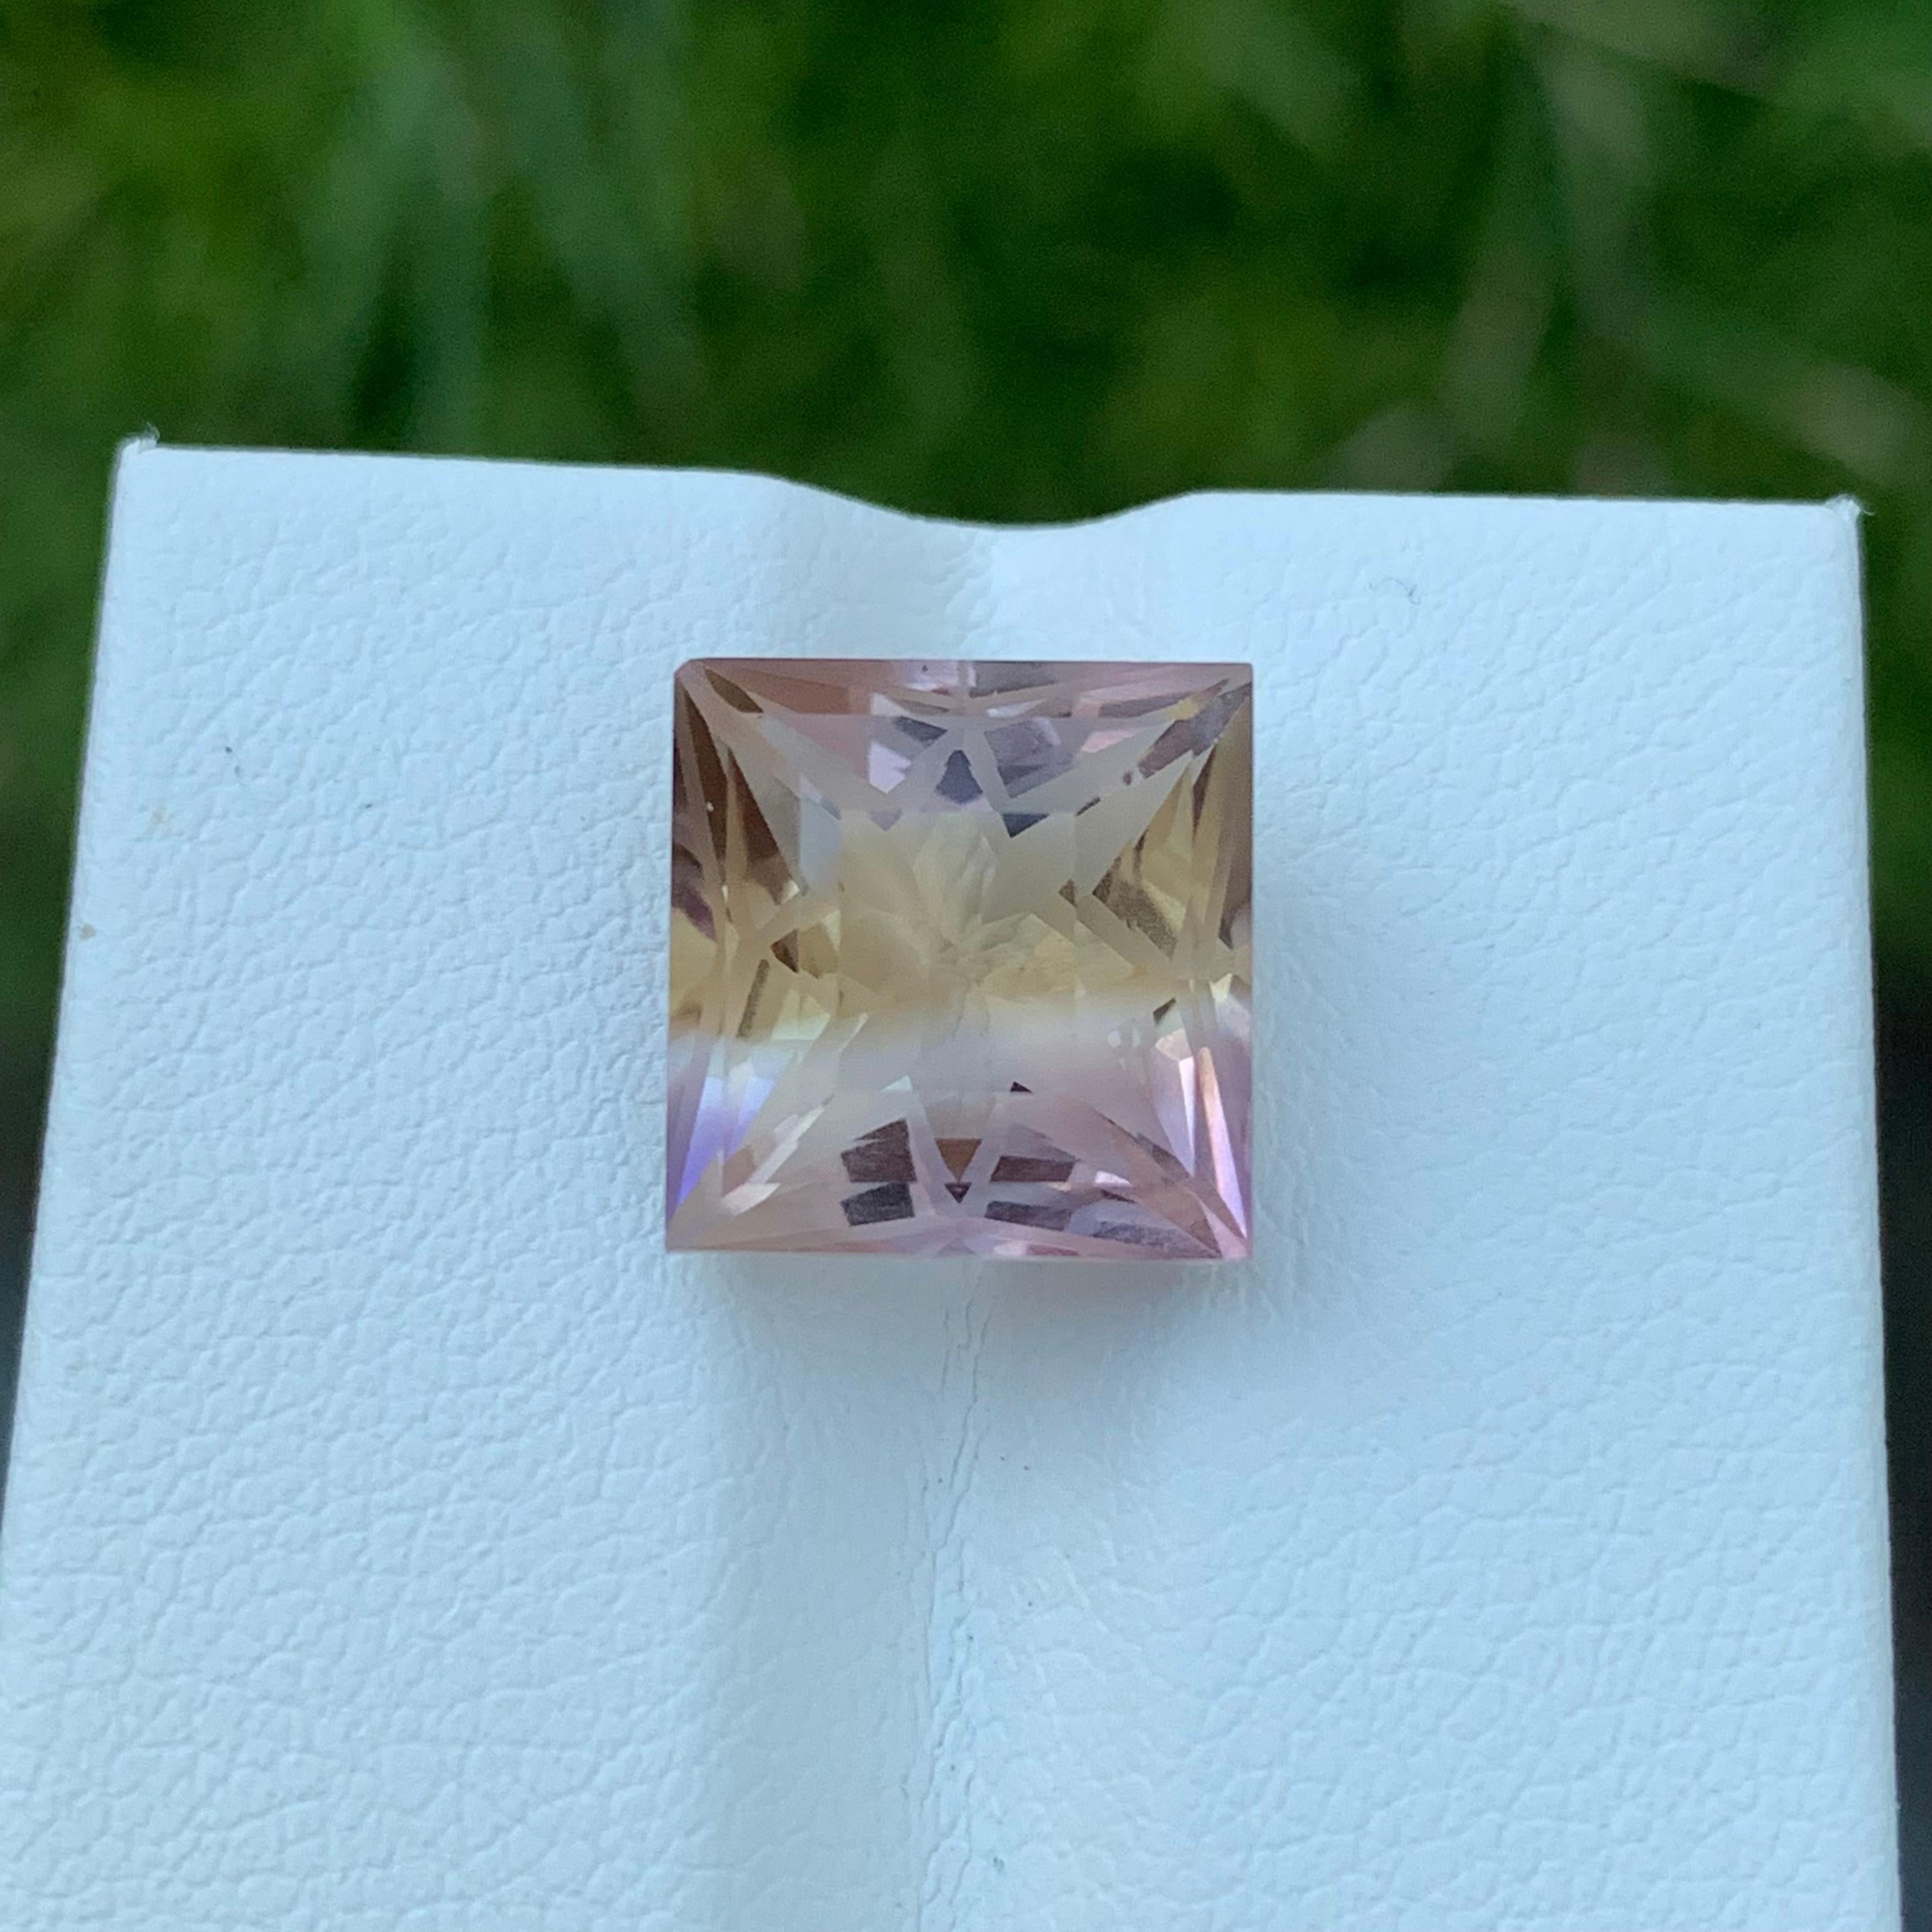 Faceted Ametrine
Weight: 6.50 Carats
Dimension; 10.8 x 10.6 x 8 Mm
Origin: Brazil
Color: Purple & Yellow
Shape: Square
Treatment: Non
Certficate: On Demand
.
Ametrine is a unique and captivating gemstone that displays a harmonious blend of two